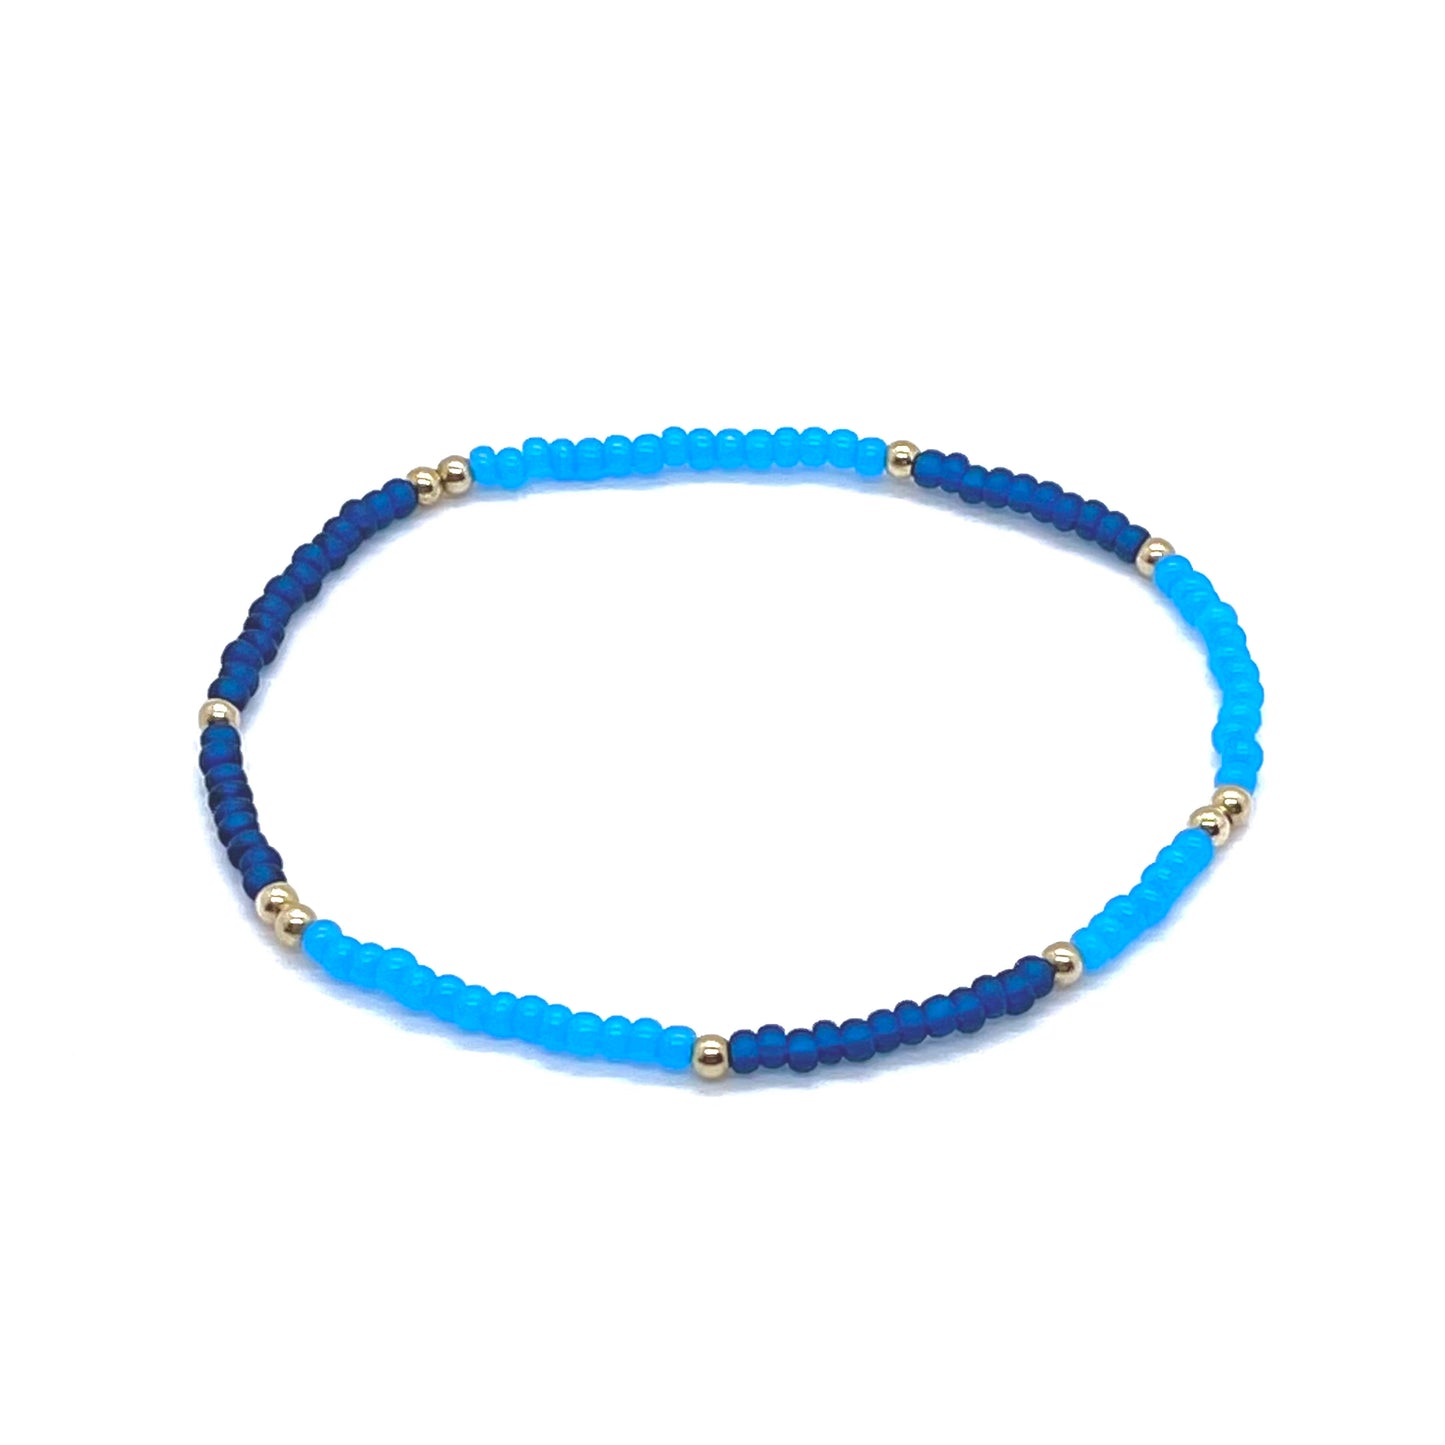 Beaded anklet with bright blue and dark blue color bars of seed beads with gold fill balls. Stretchy anklet handmade in NYC.